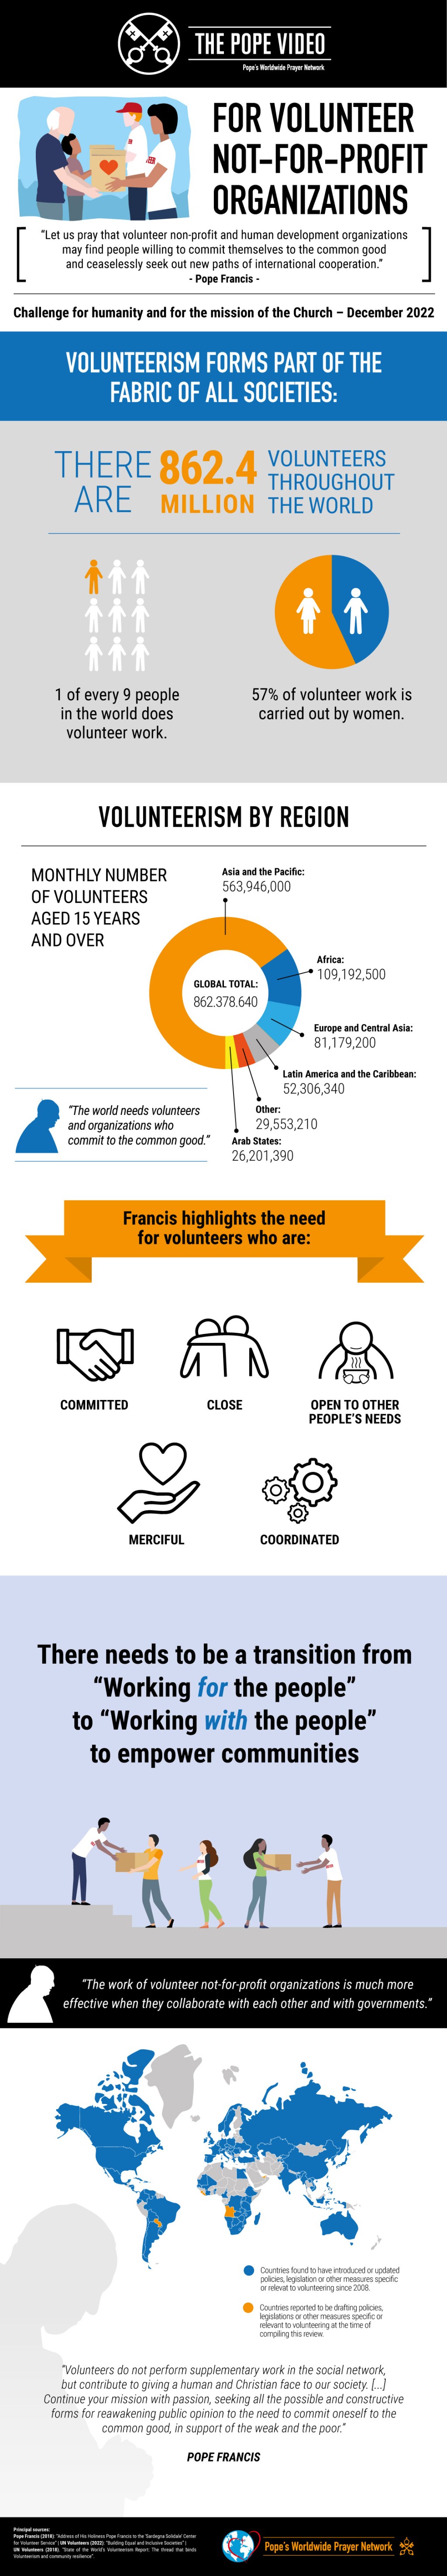 The Pope Video infographic volunteers